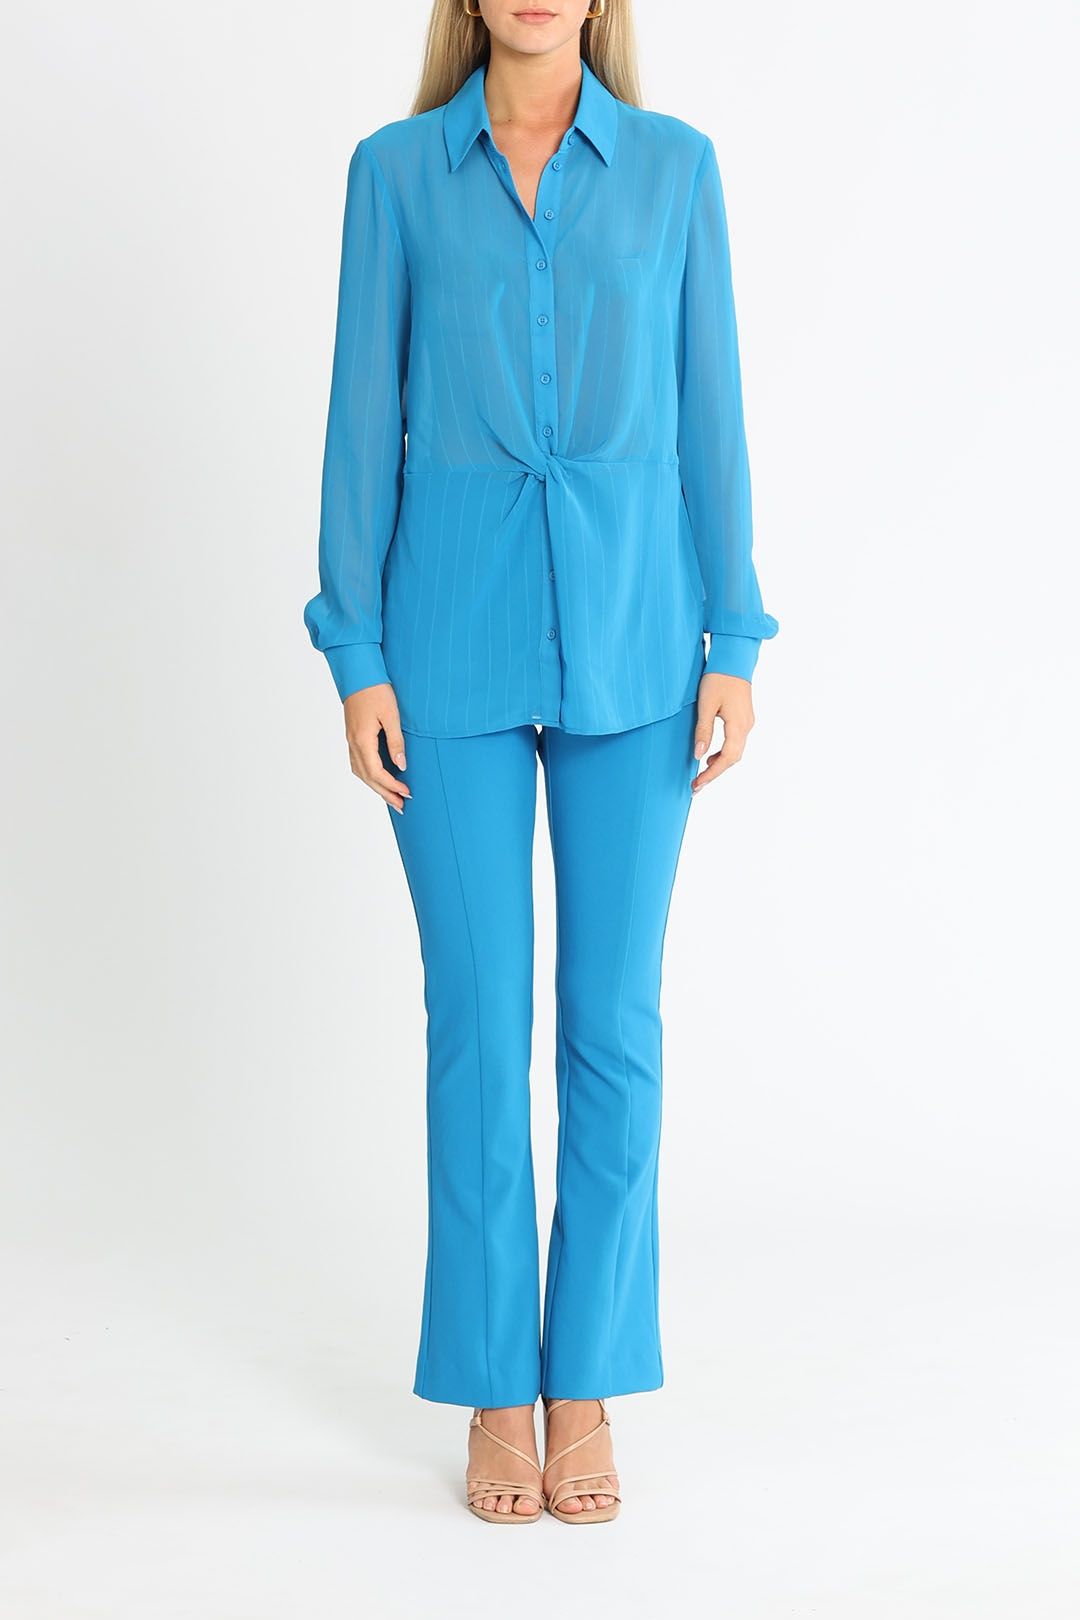 Cue Corded Georgette Twist Front Shirt